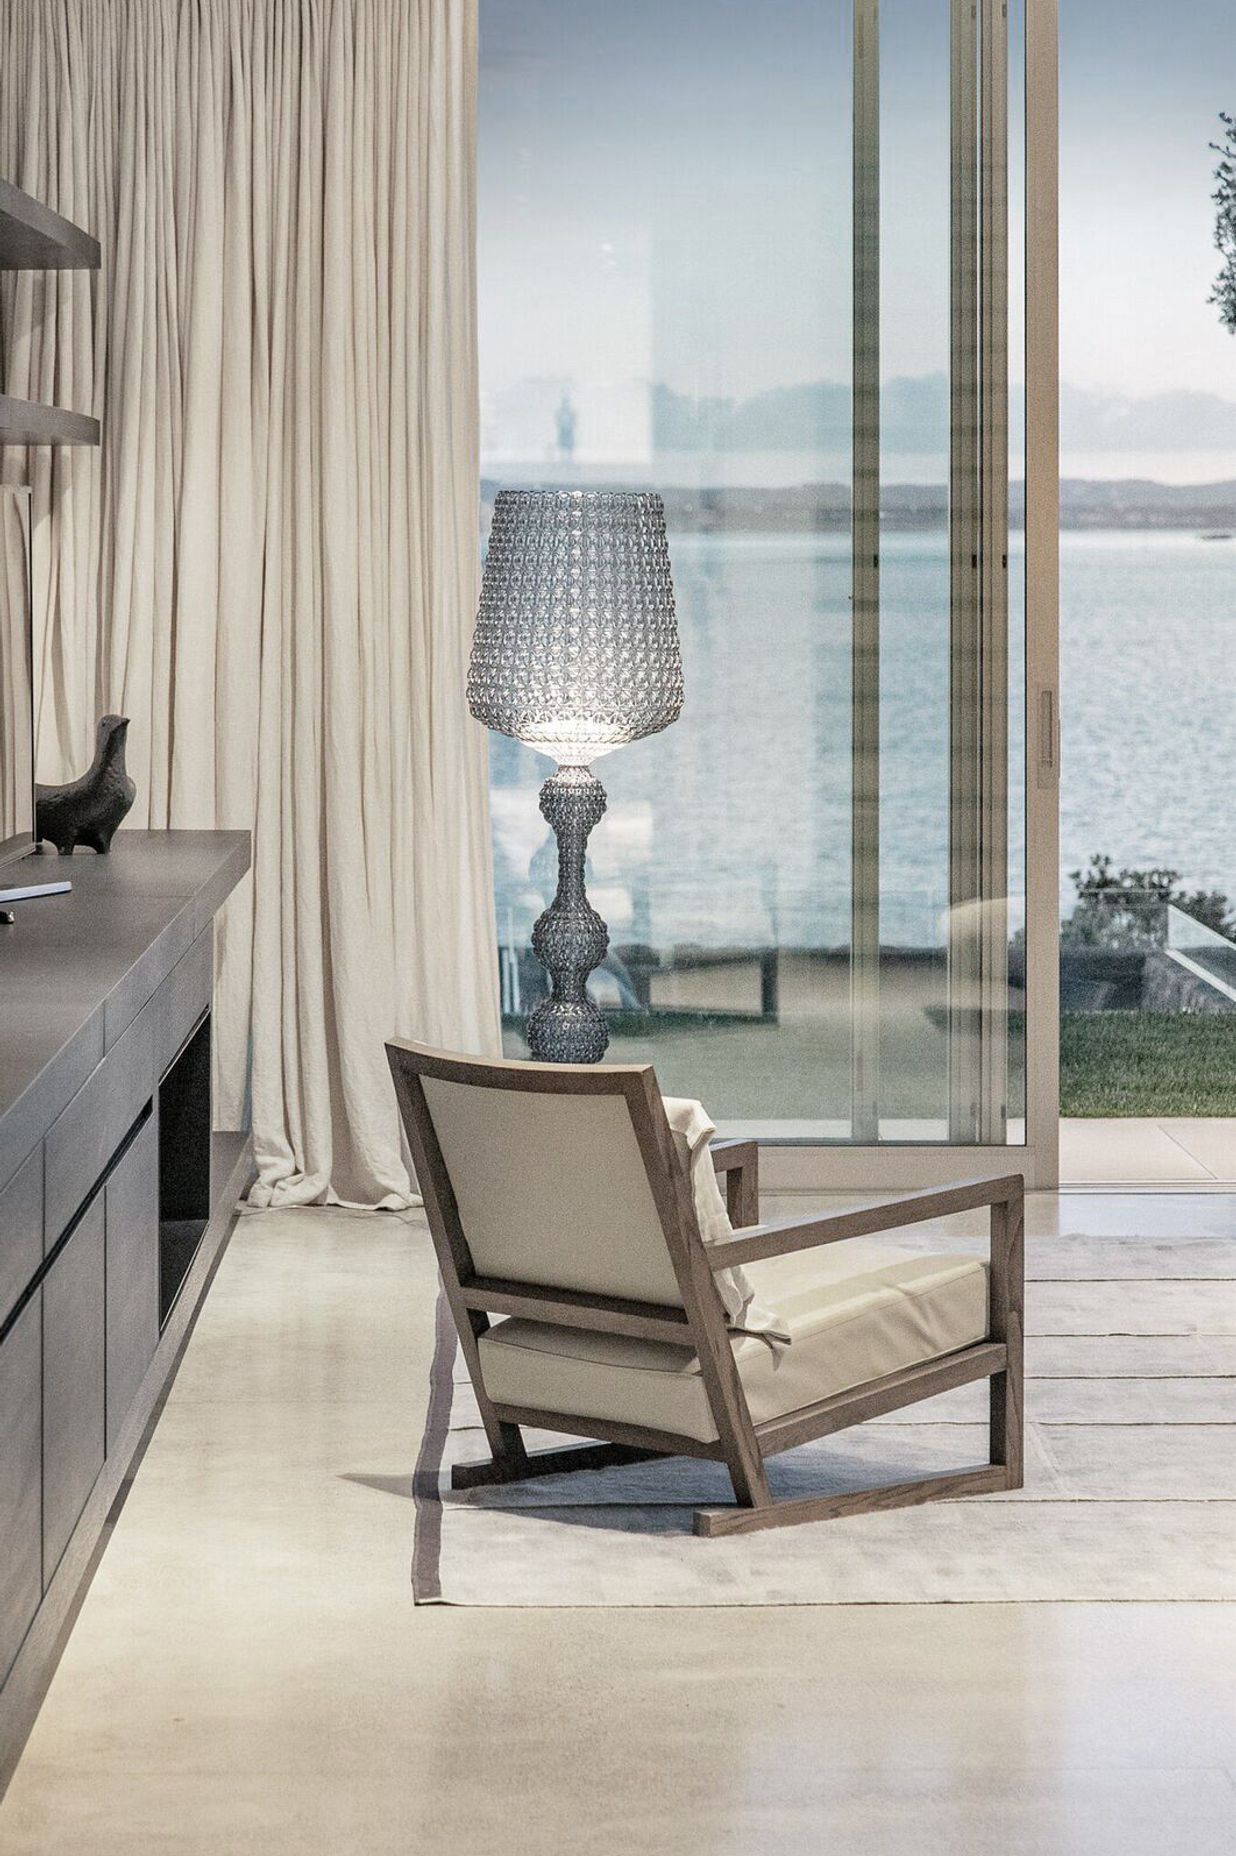 The perfect spot to sit and enjoy the view of the Waitemata Harbour.